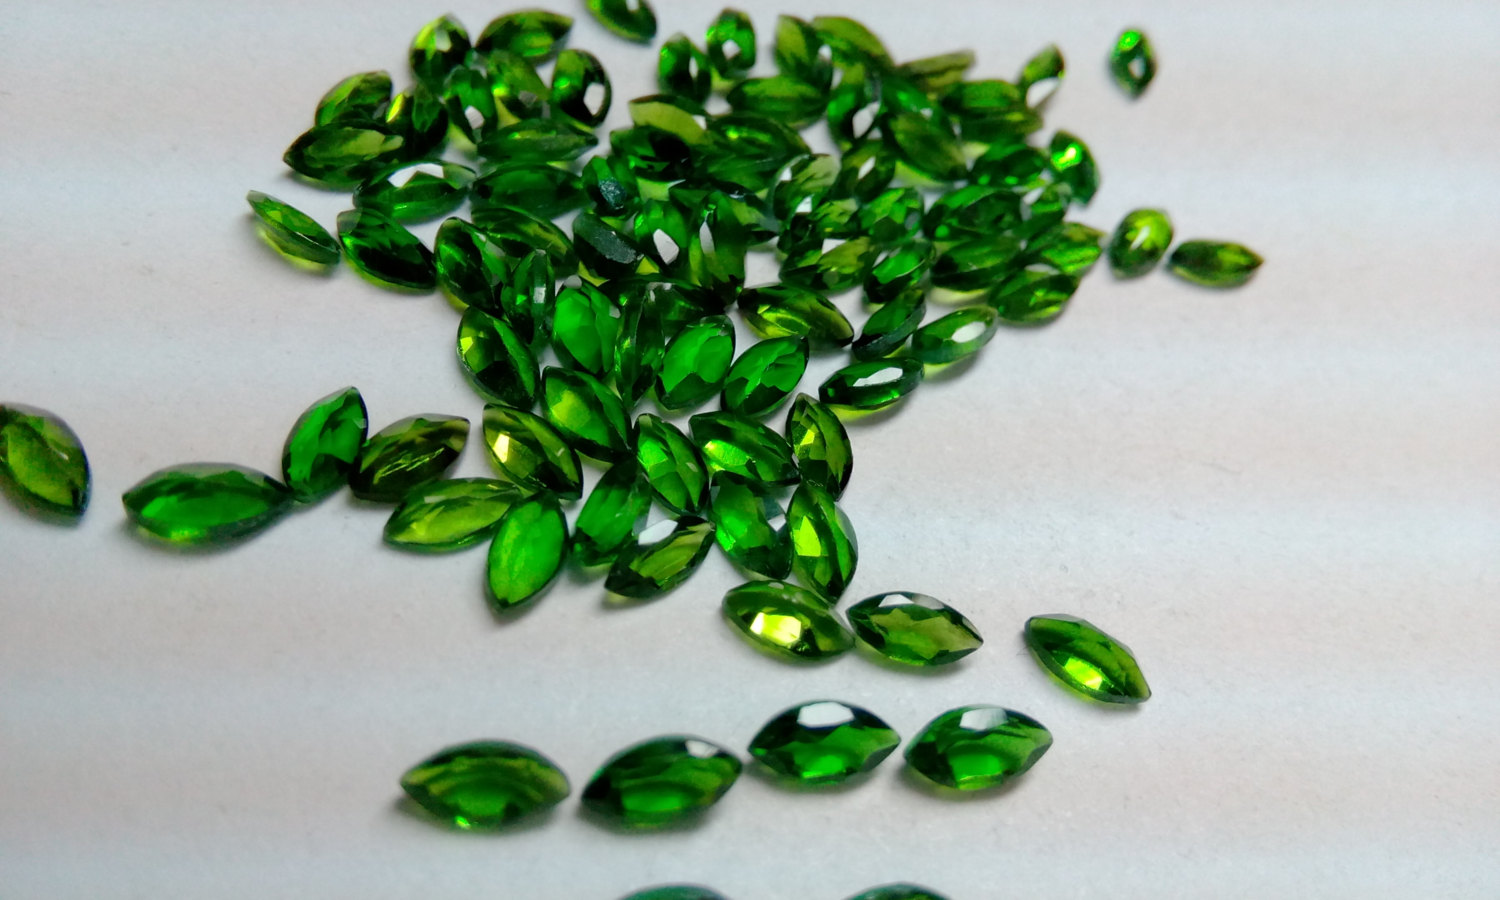 CHROME DIOPSIDE 6 x 4 MM OVAL CUT OUTSTANDING GREEN COLOR ALL NATURAL